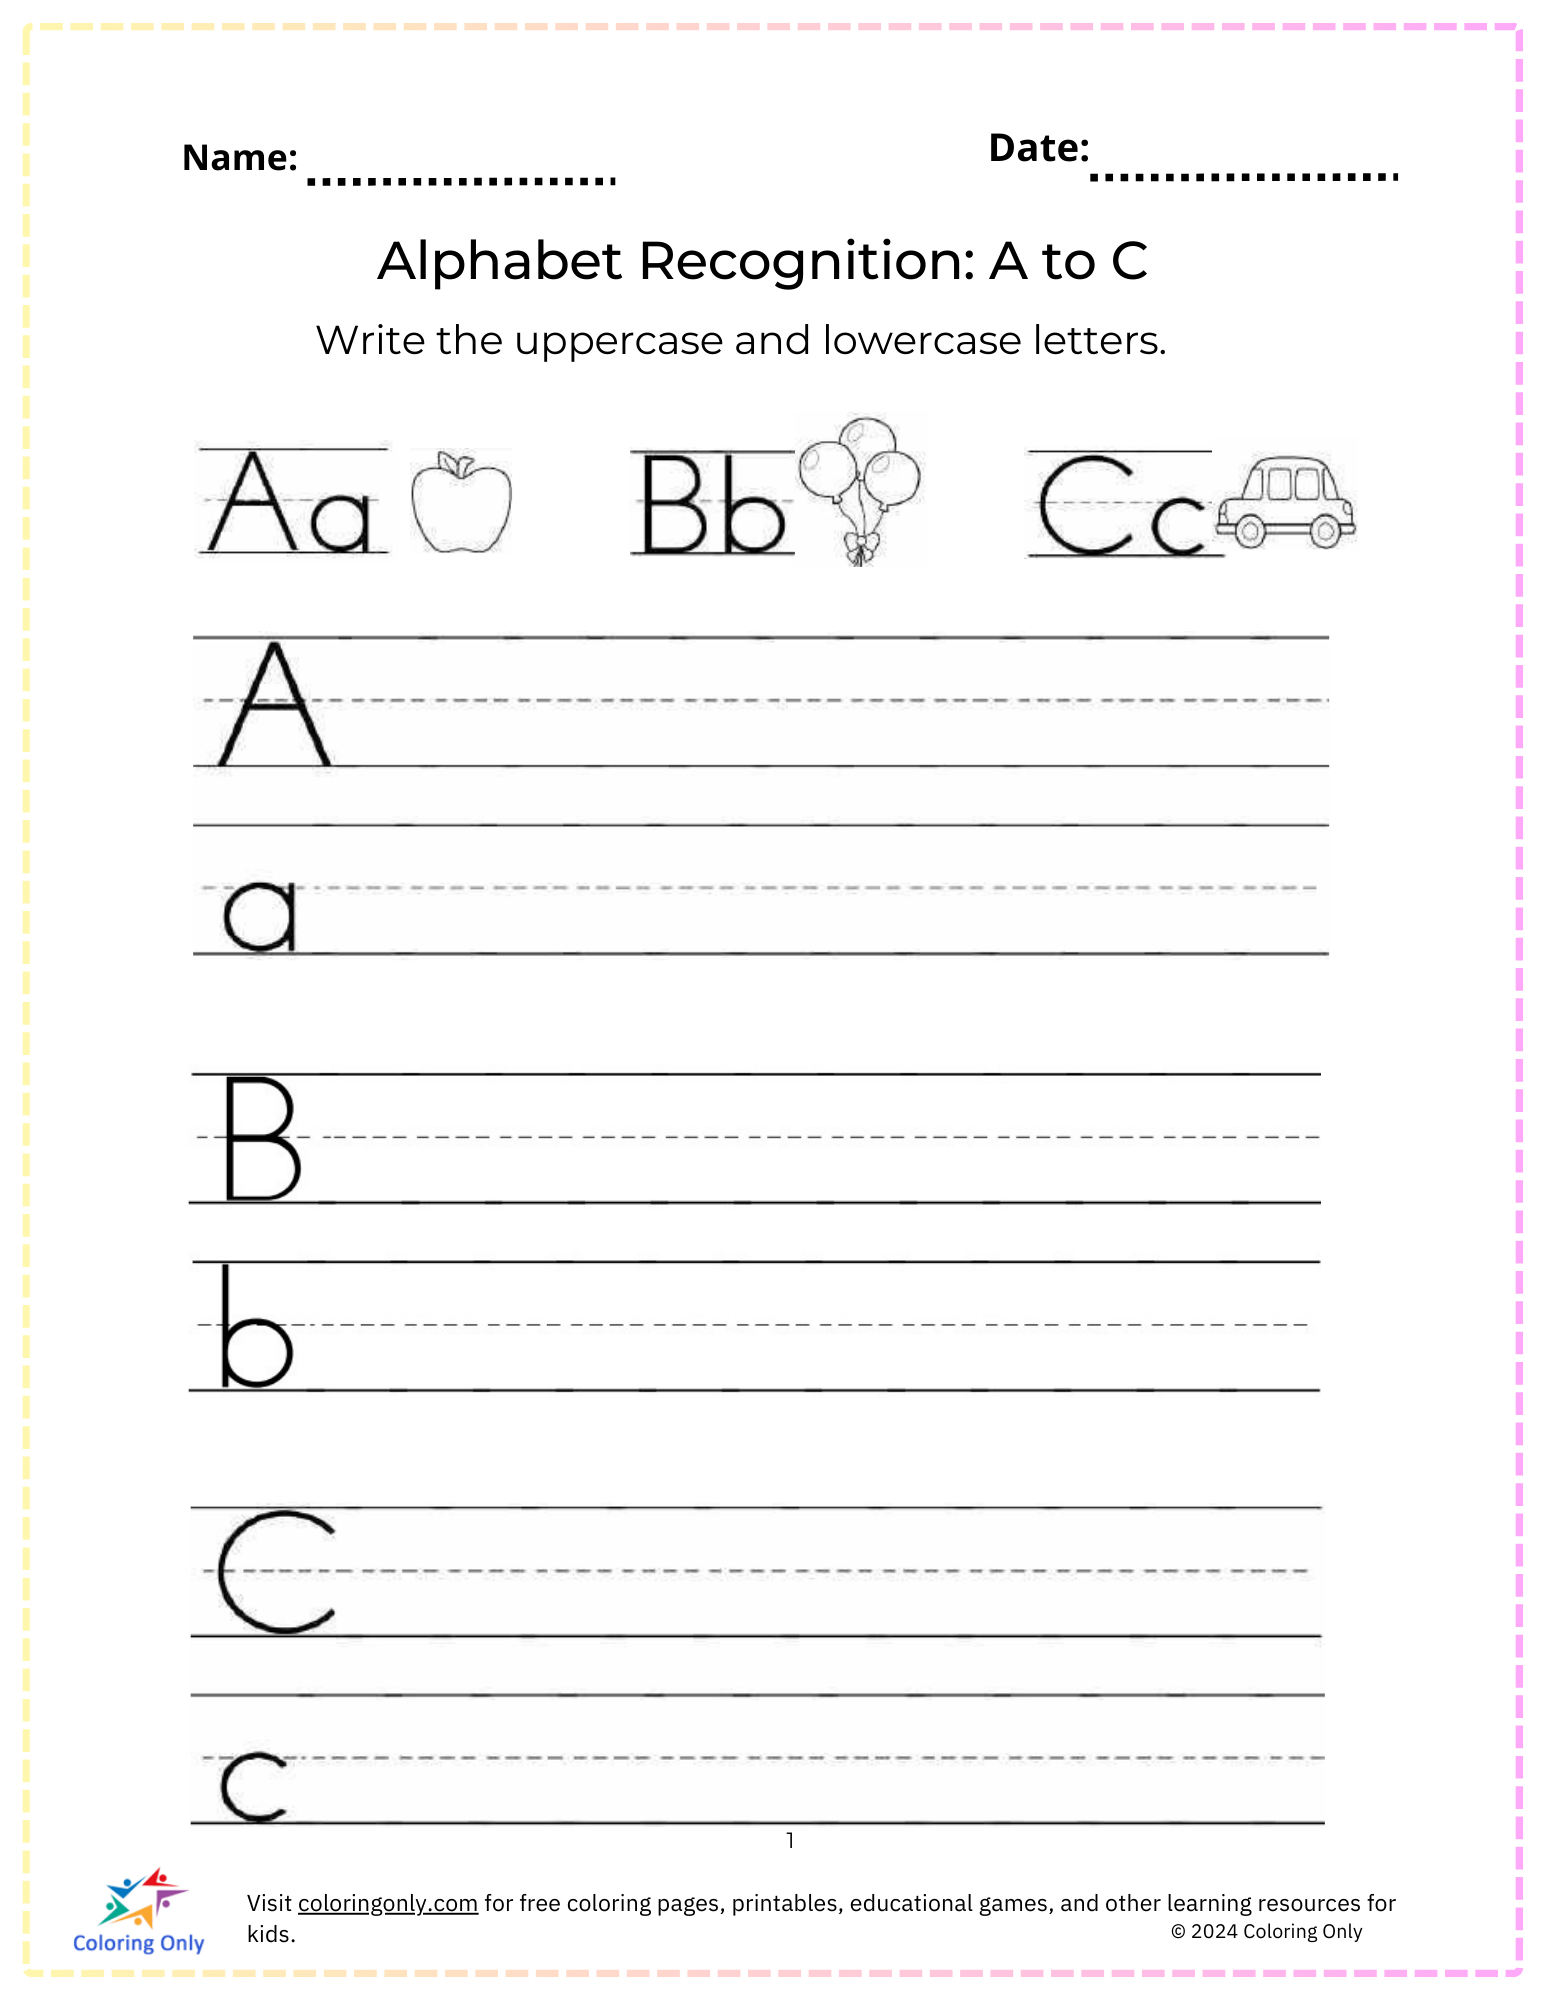 Alphabet Recognition: A to C Free Printable Worksheet